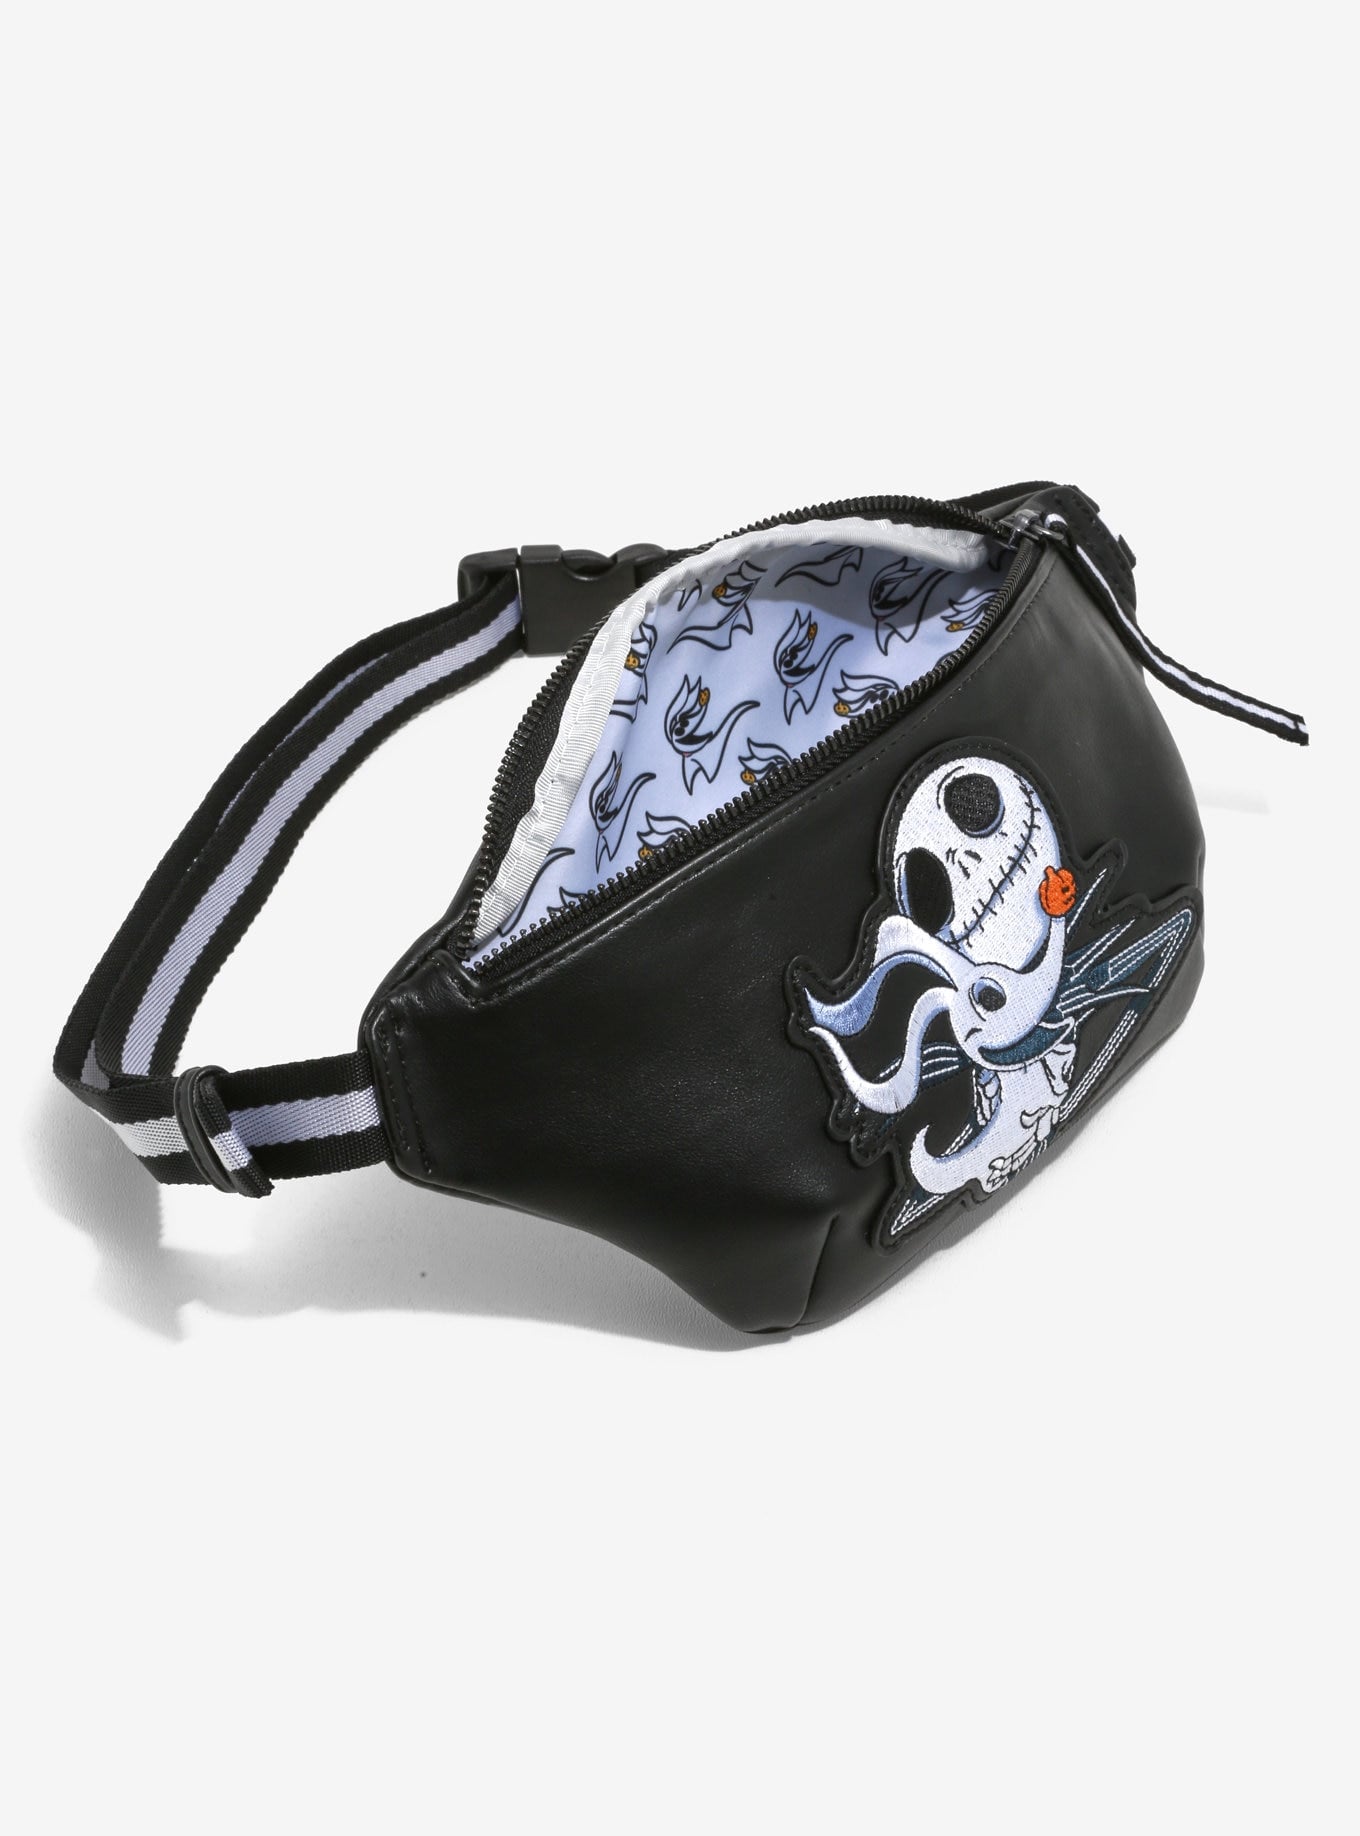 Nightmare Before Christmas Fanny Pack